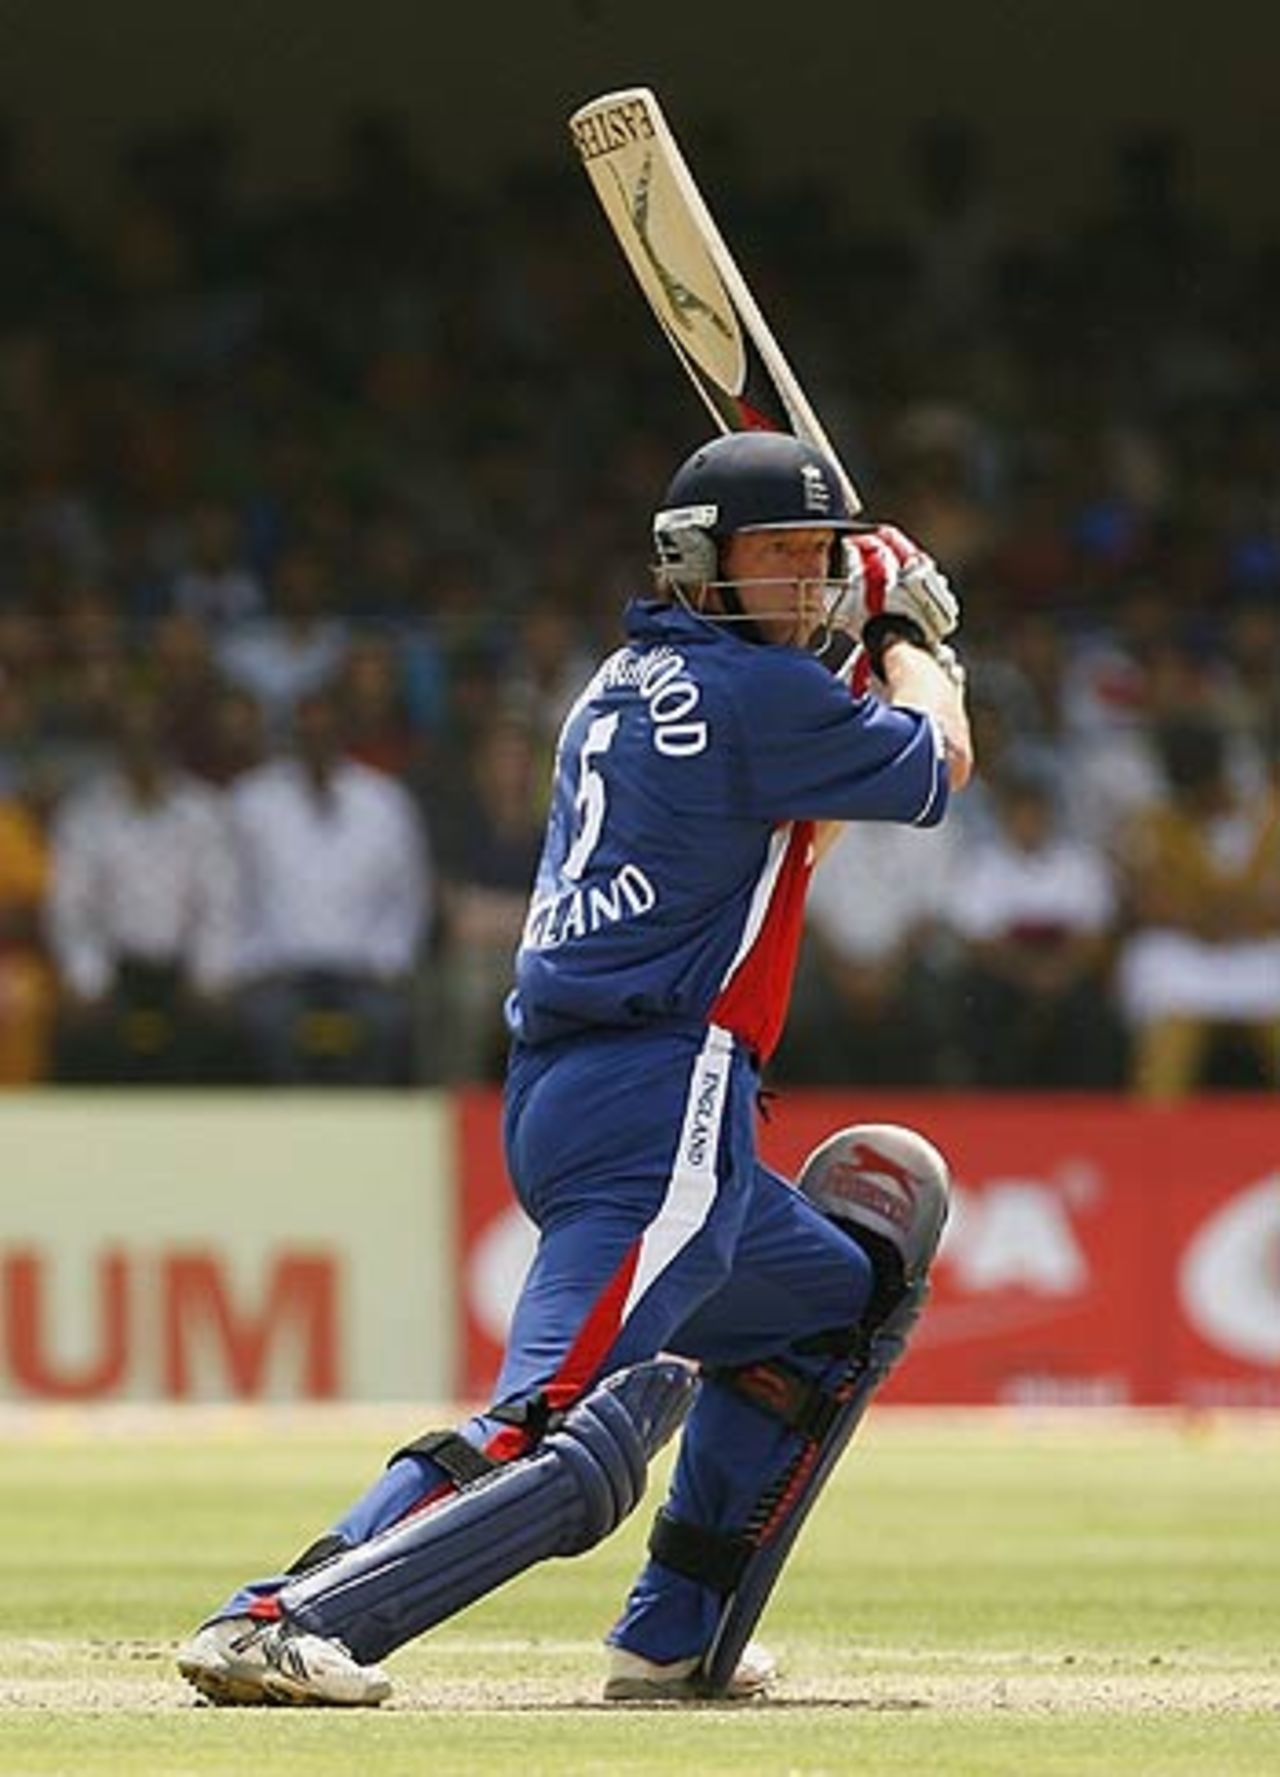 Paul Collingwood drives on the off side, India v England, 7th ODI, Indore, April 15 2006